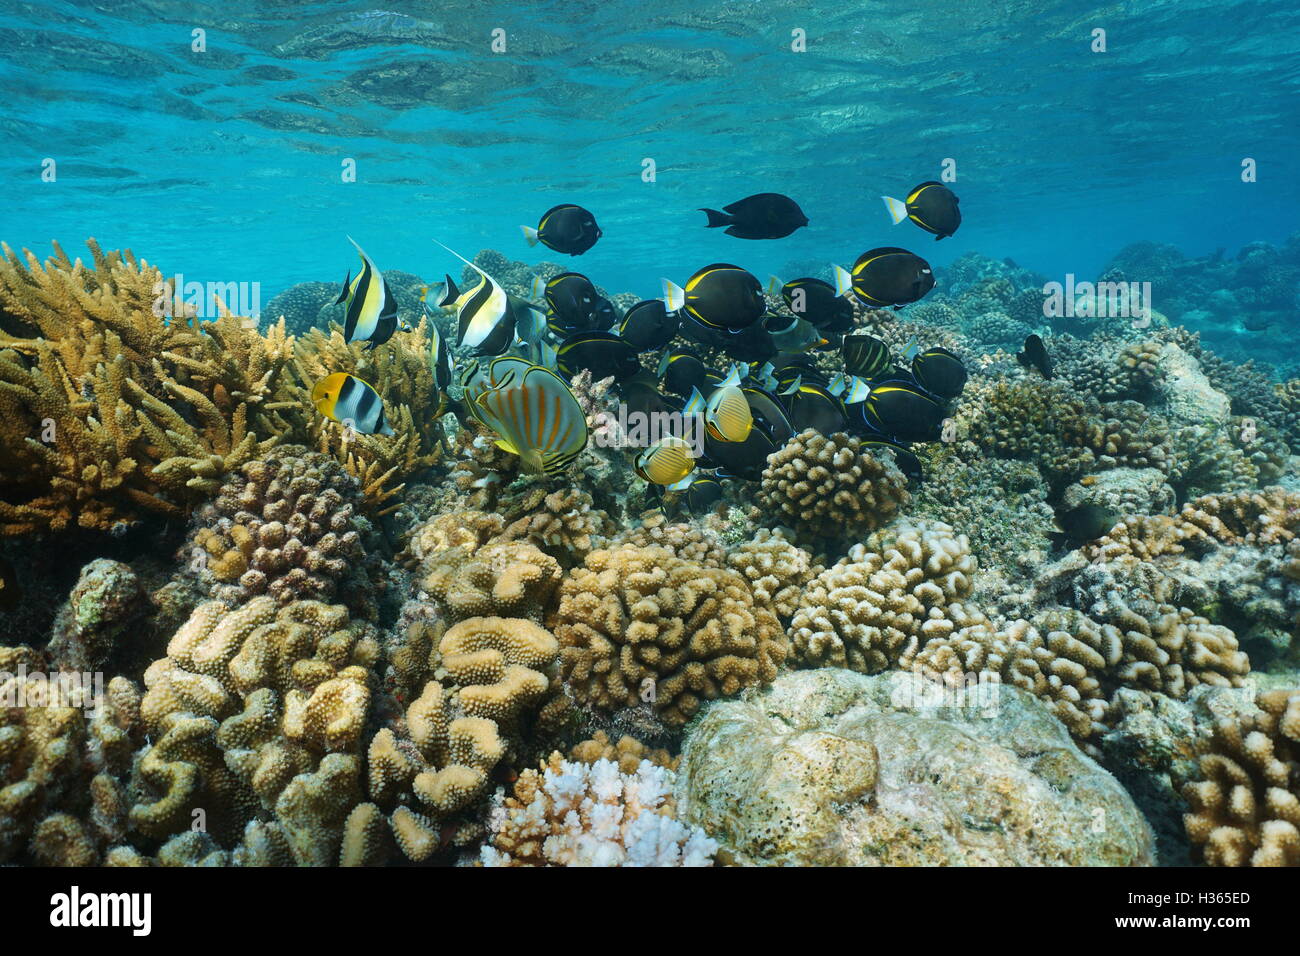 Underwater coral reef with shoal of colorful tropical fish in shallow water, Rangiroa lagoon, natural scene, Pacific ocean Stock Photo